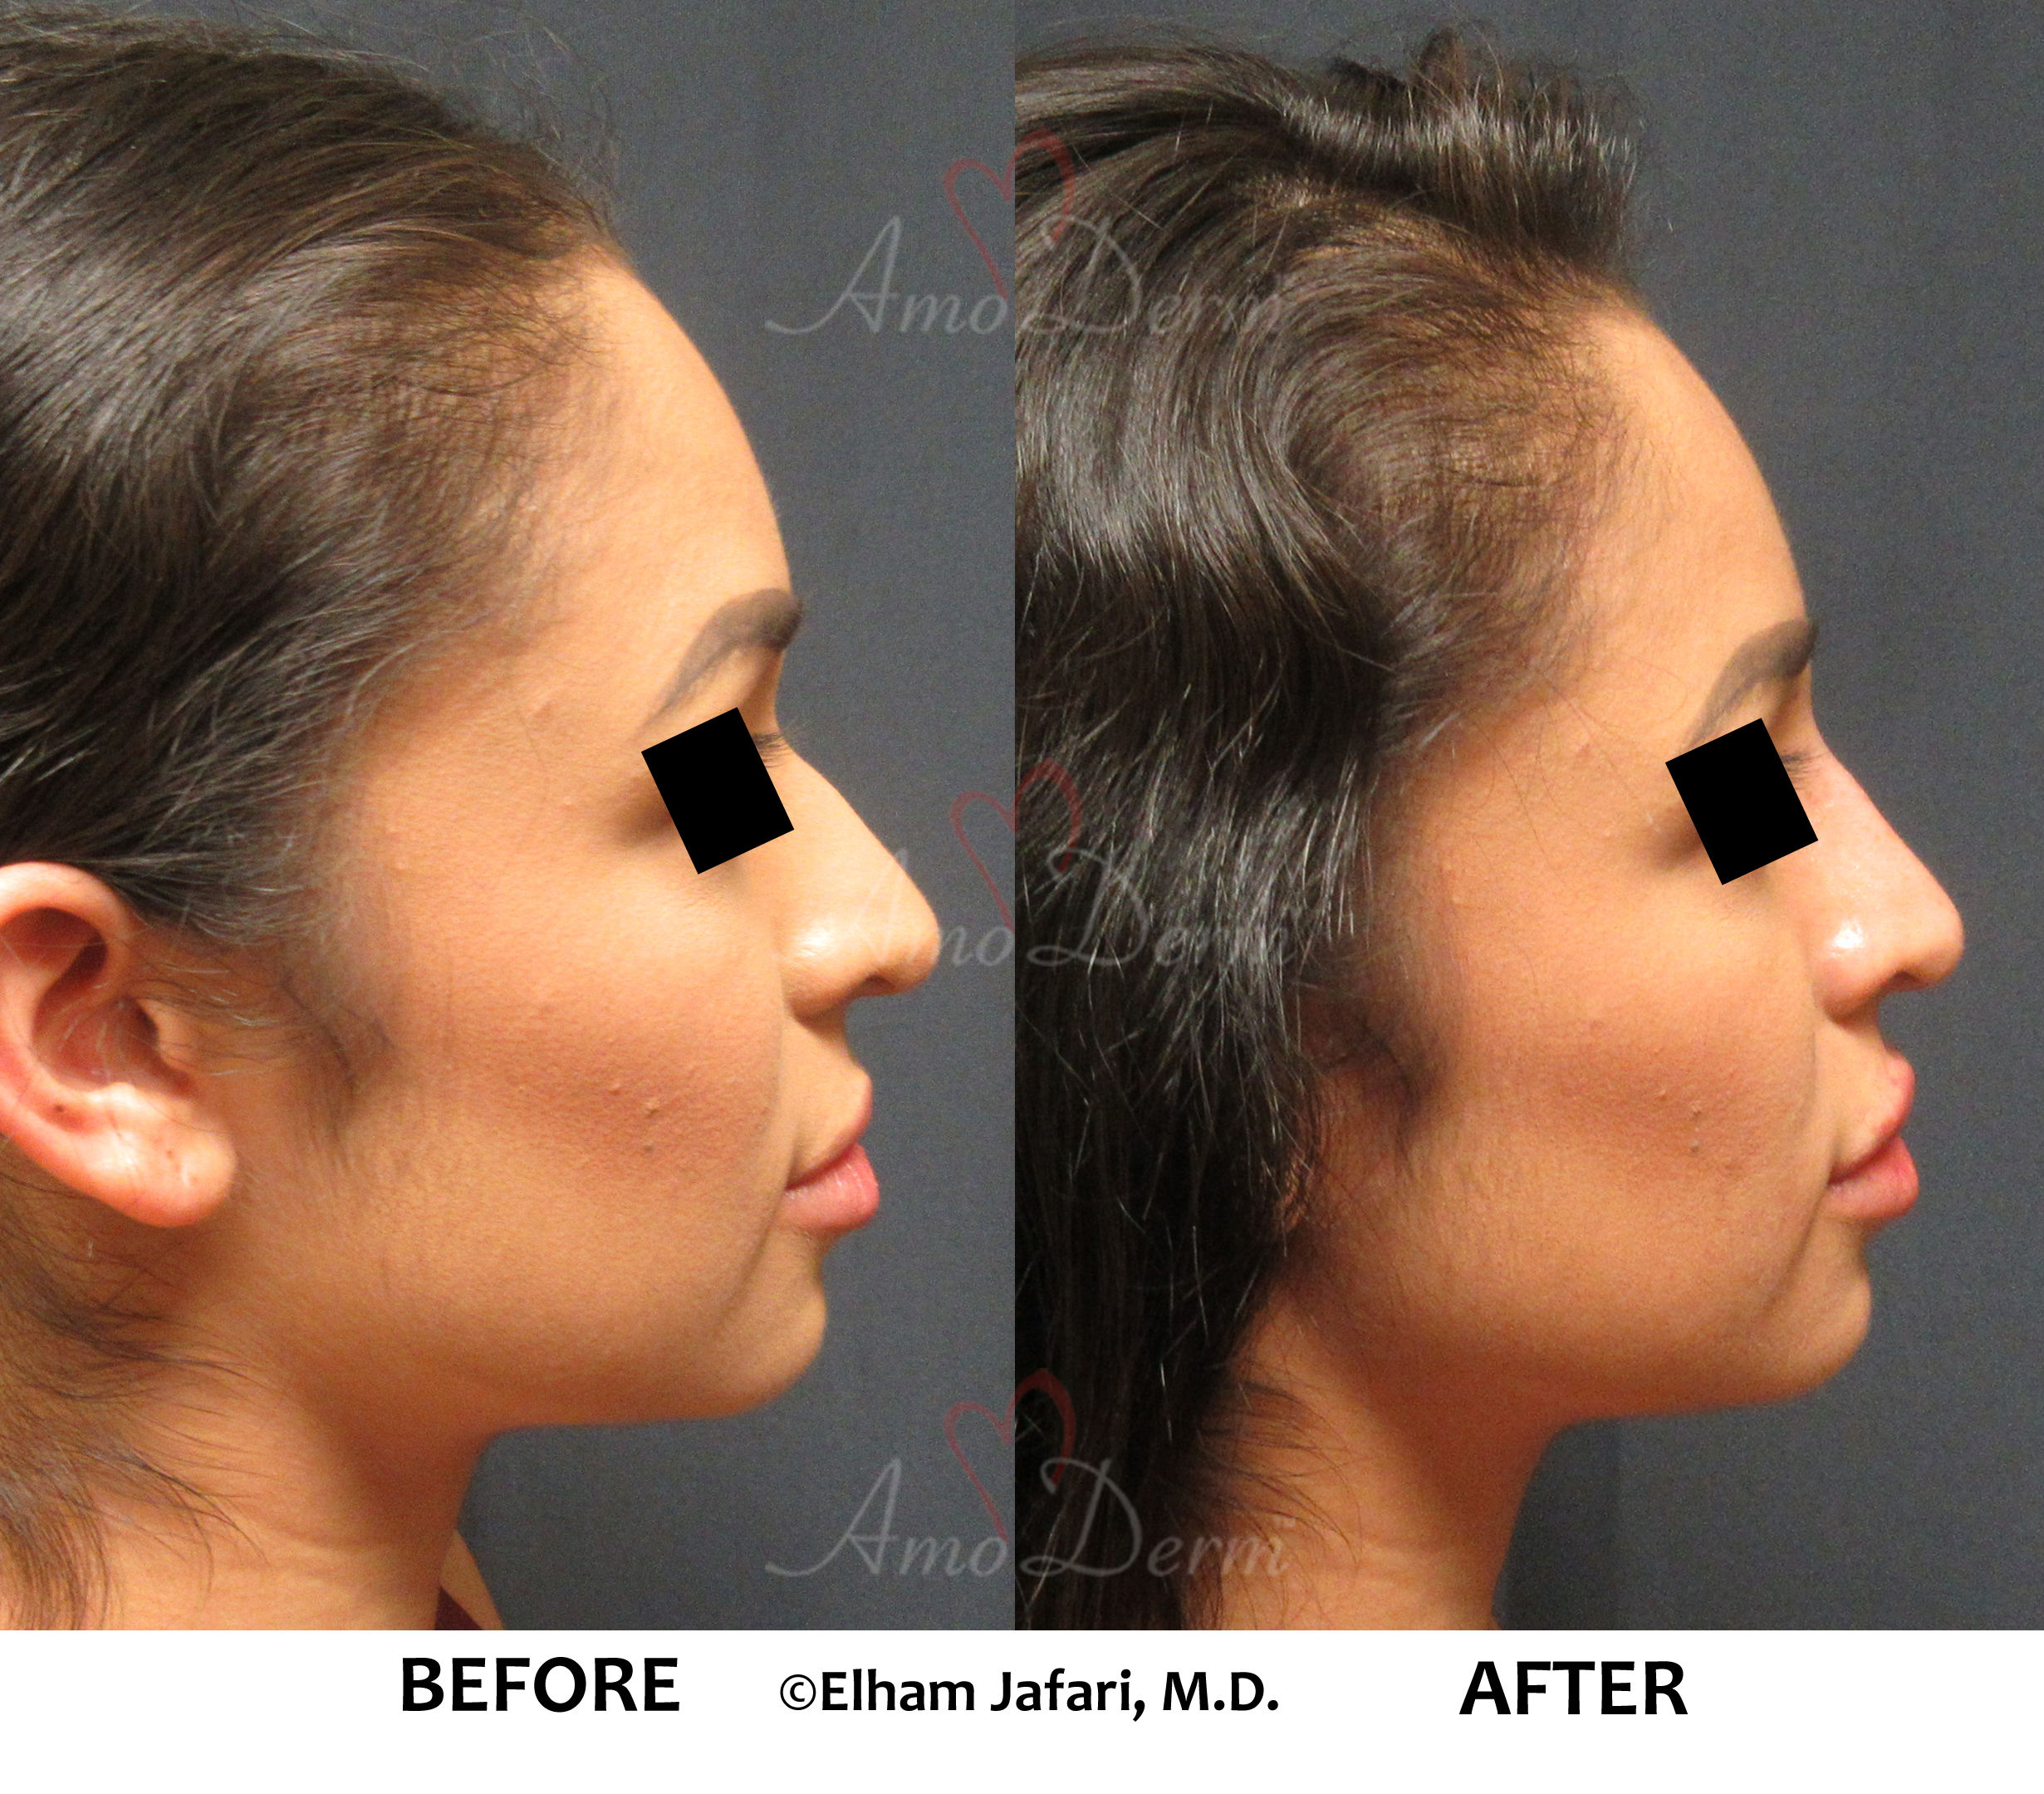 nonsurgical nose job - Amoderm : Before & After Gallery